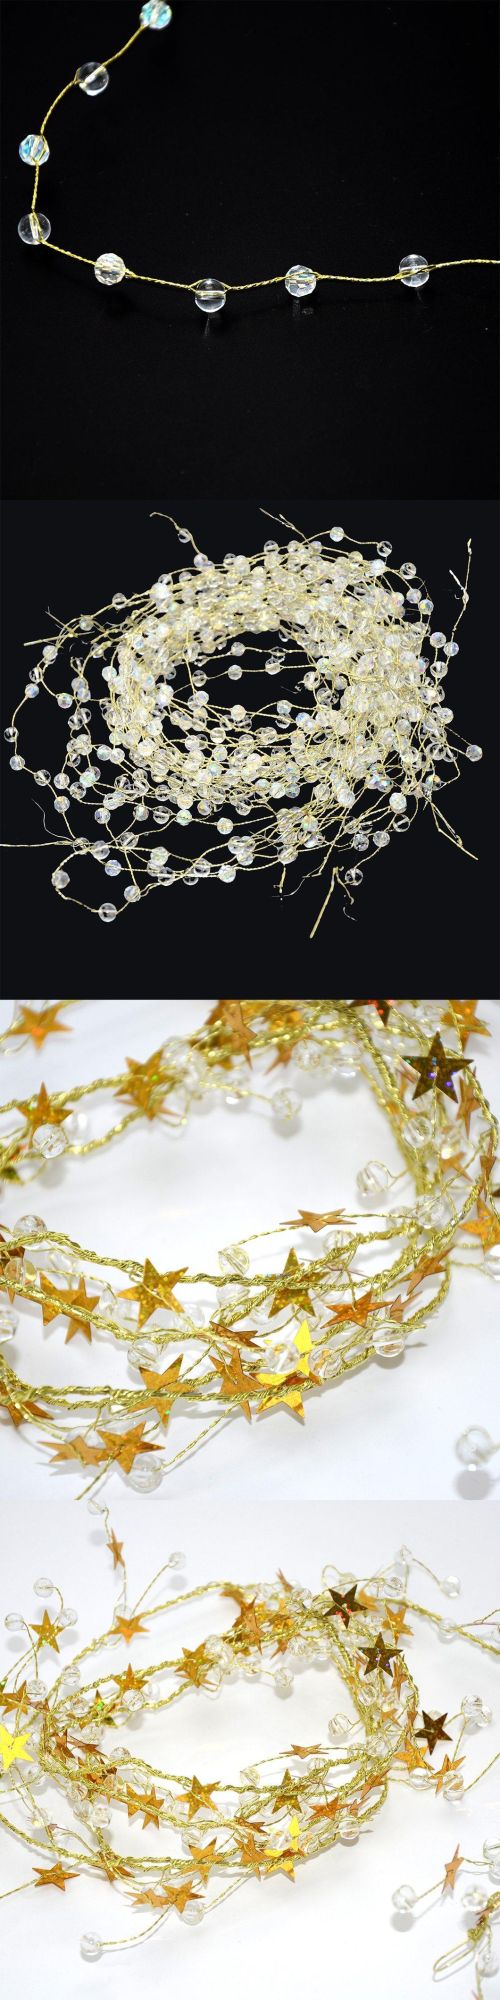 Festival Decoration Material High Quality Christmas Ornaments Star for Motif Light